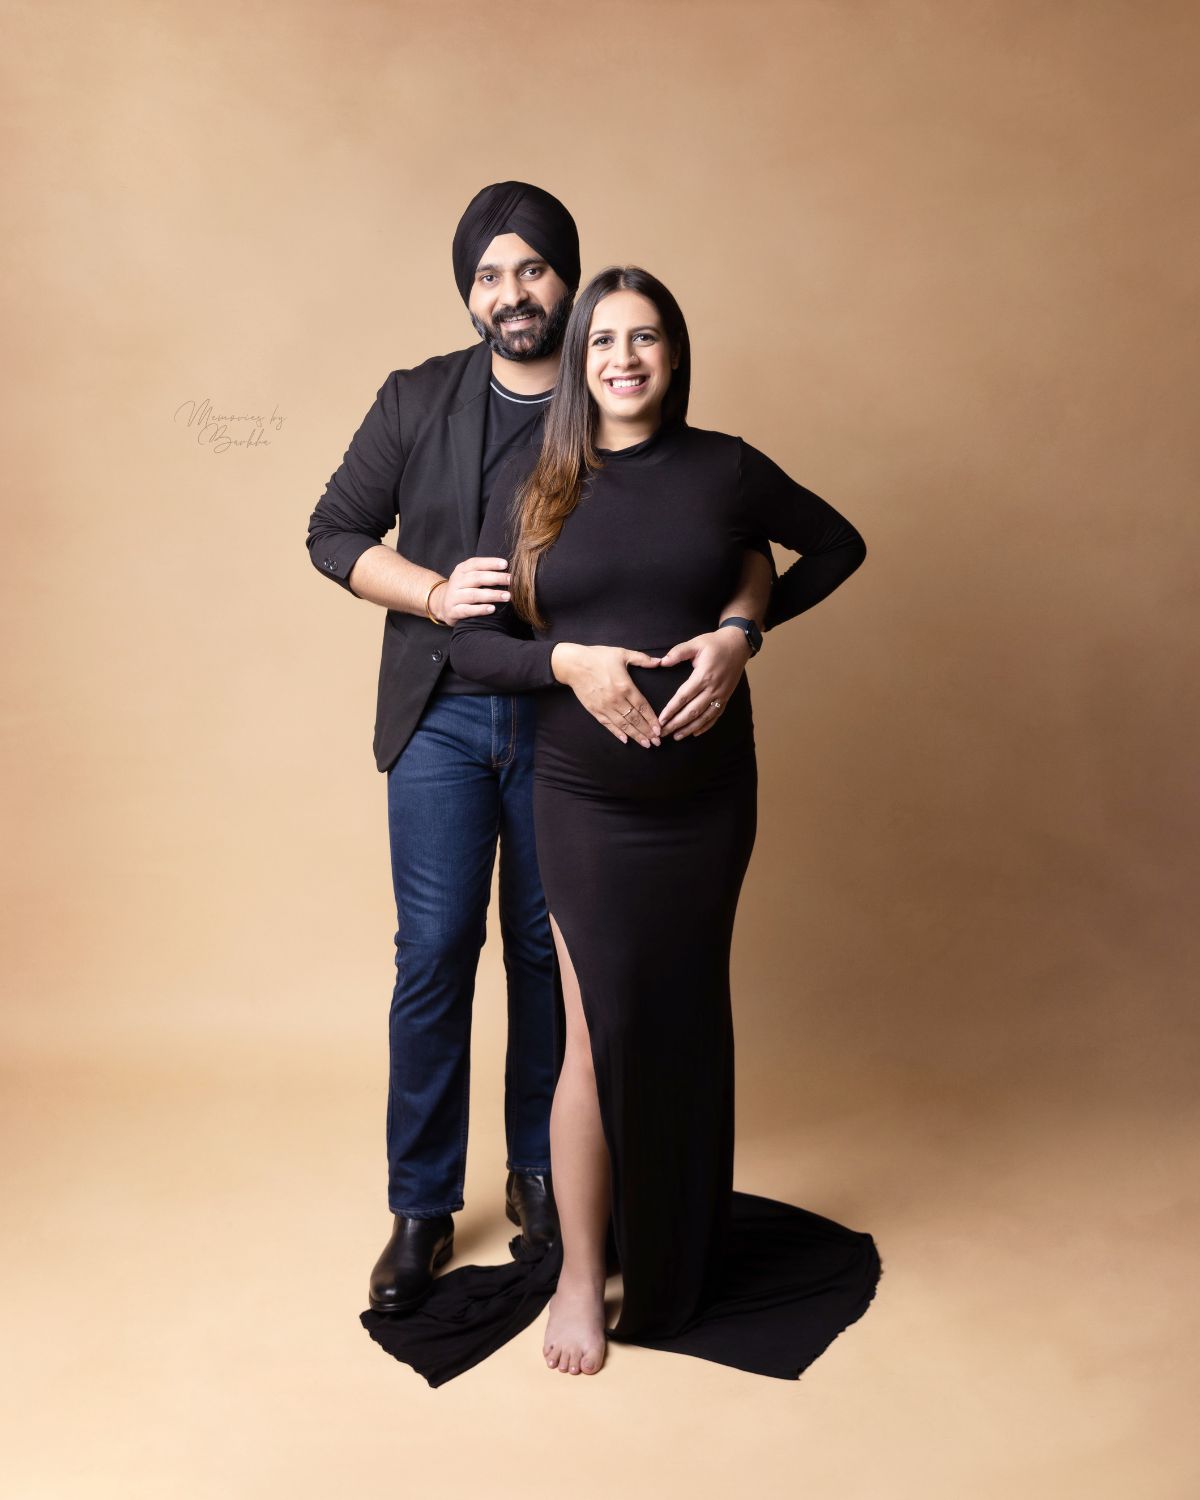 The Art of Capturing Emotional Connection: Pregnancy Couple Poses